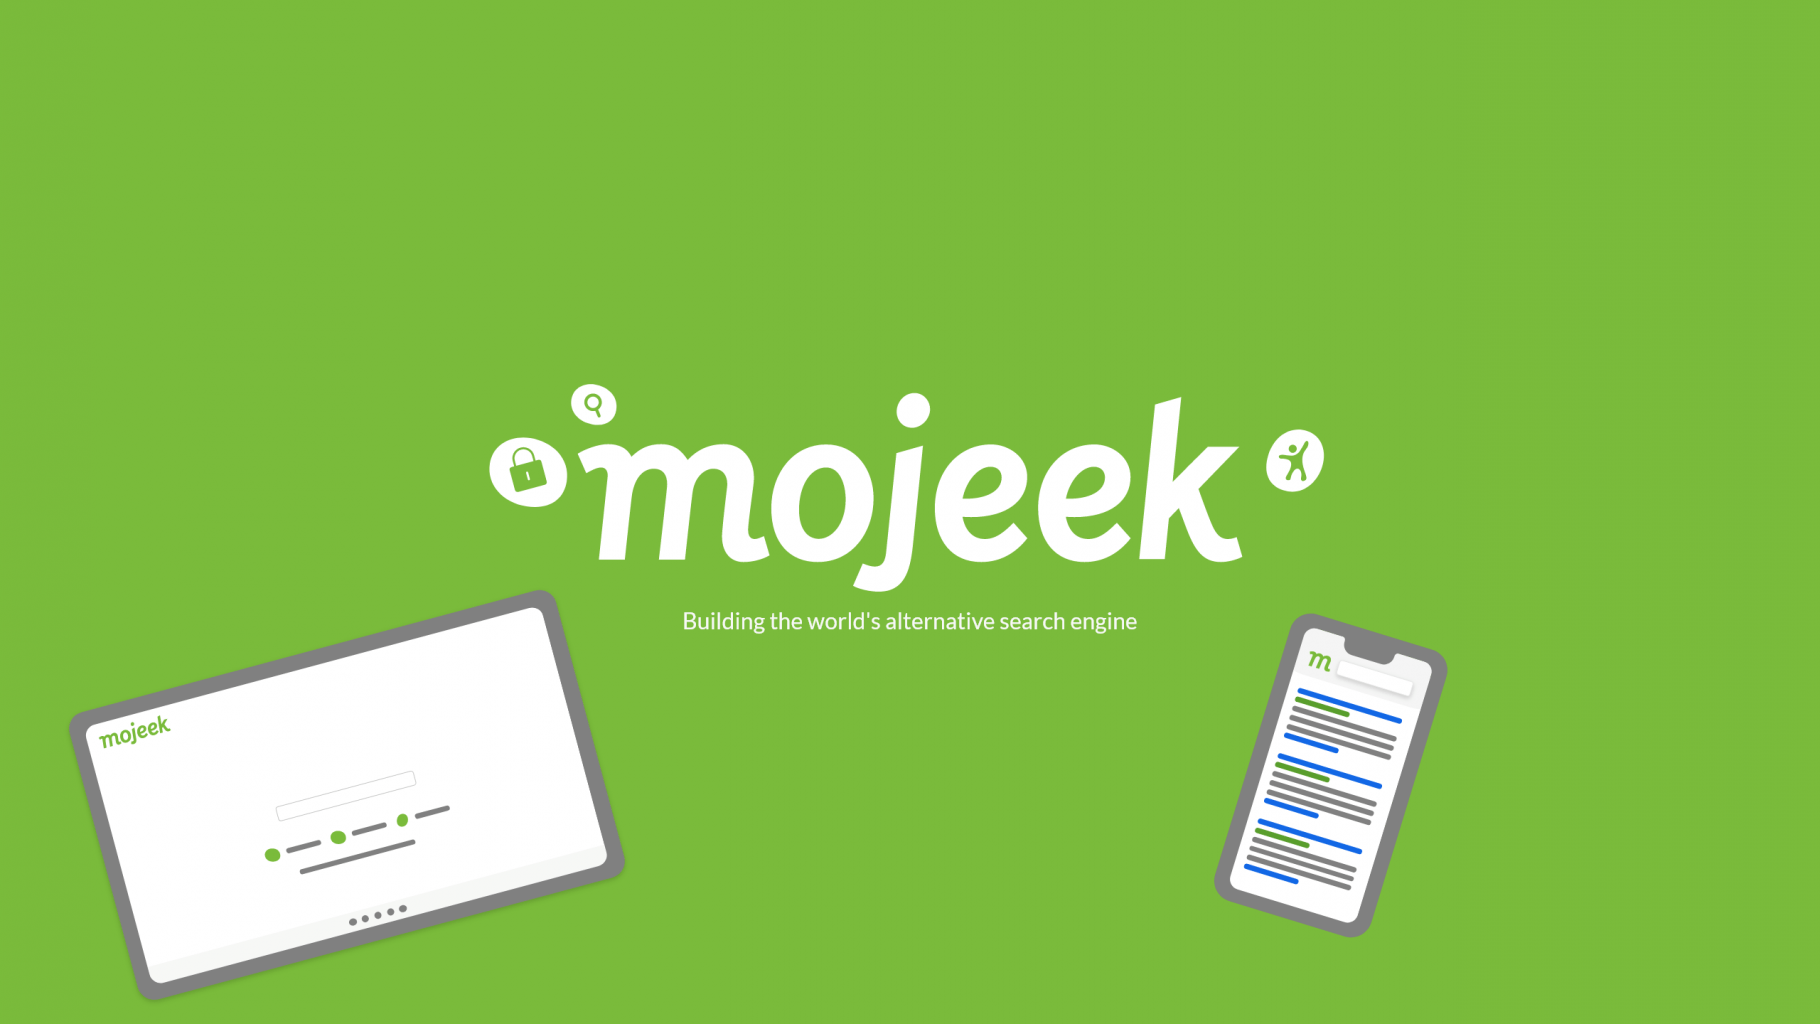 the Mojeek logo next to a phone and a tablet